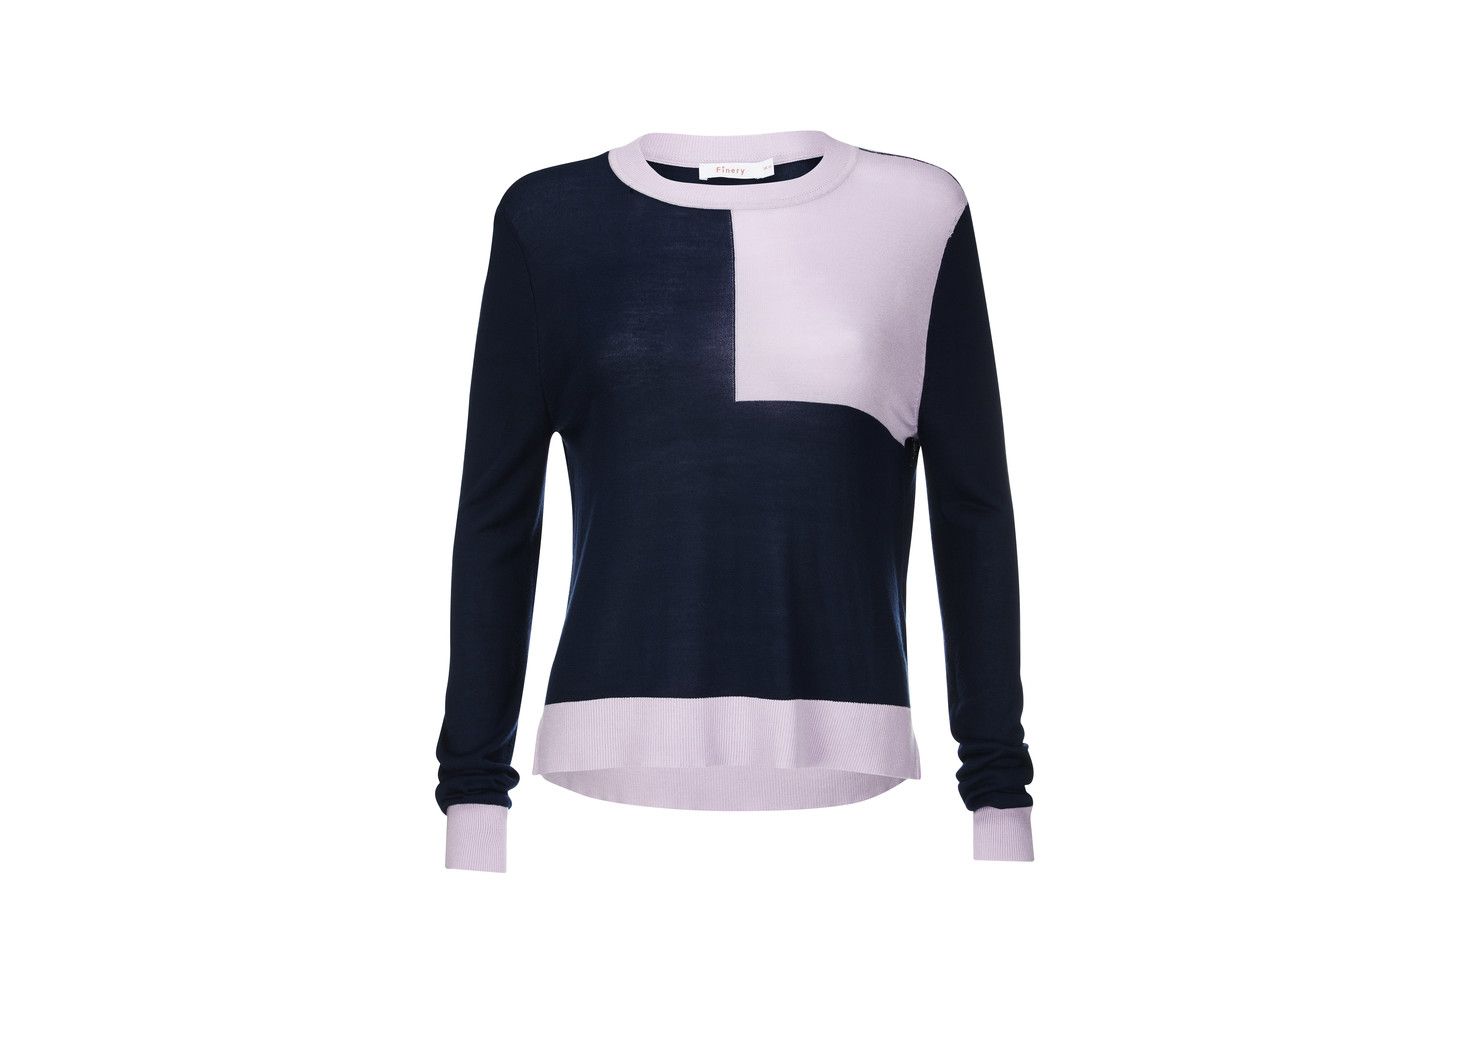 Roux Navy and Lilac Knitted Jumper - Multi